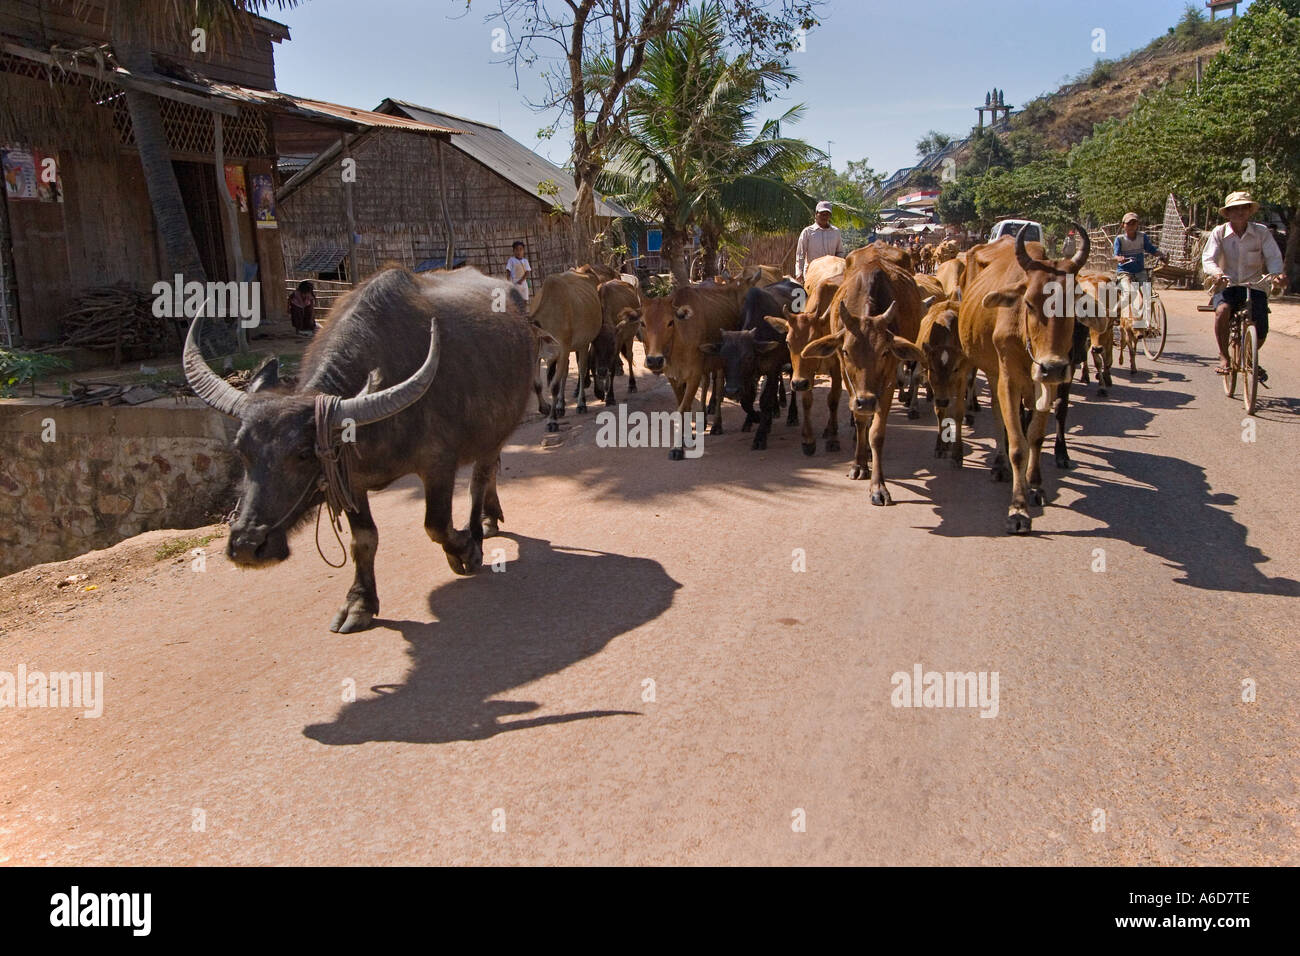 Cattle a water buffalo are herded through the street of a village near Siem Reap Cambodia Stock Photo